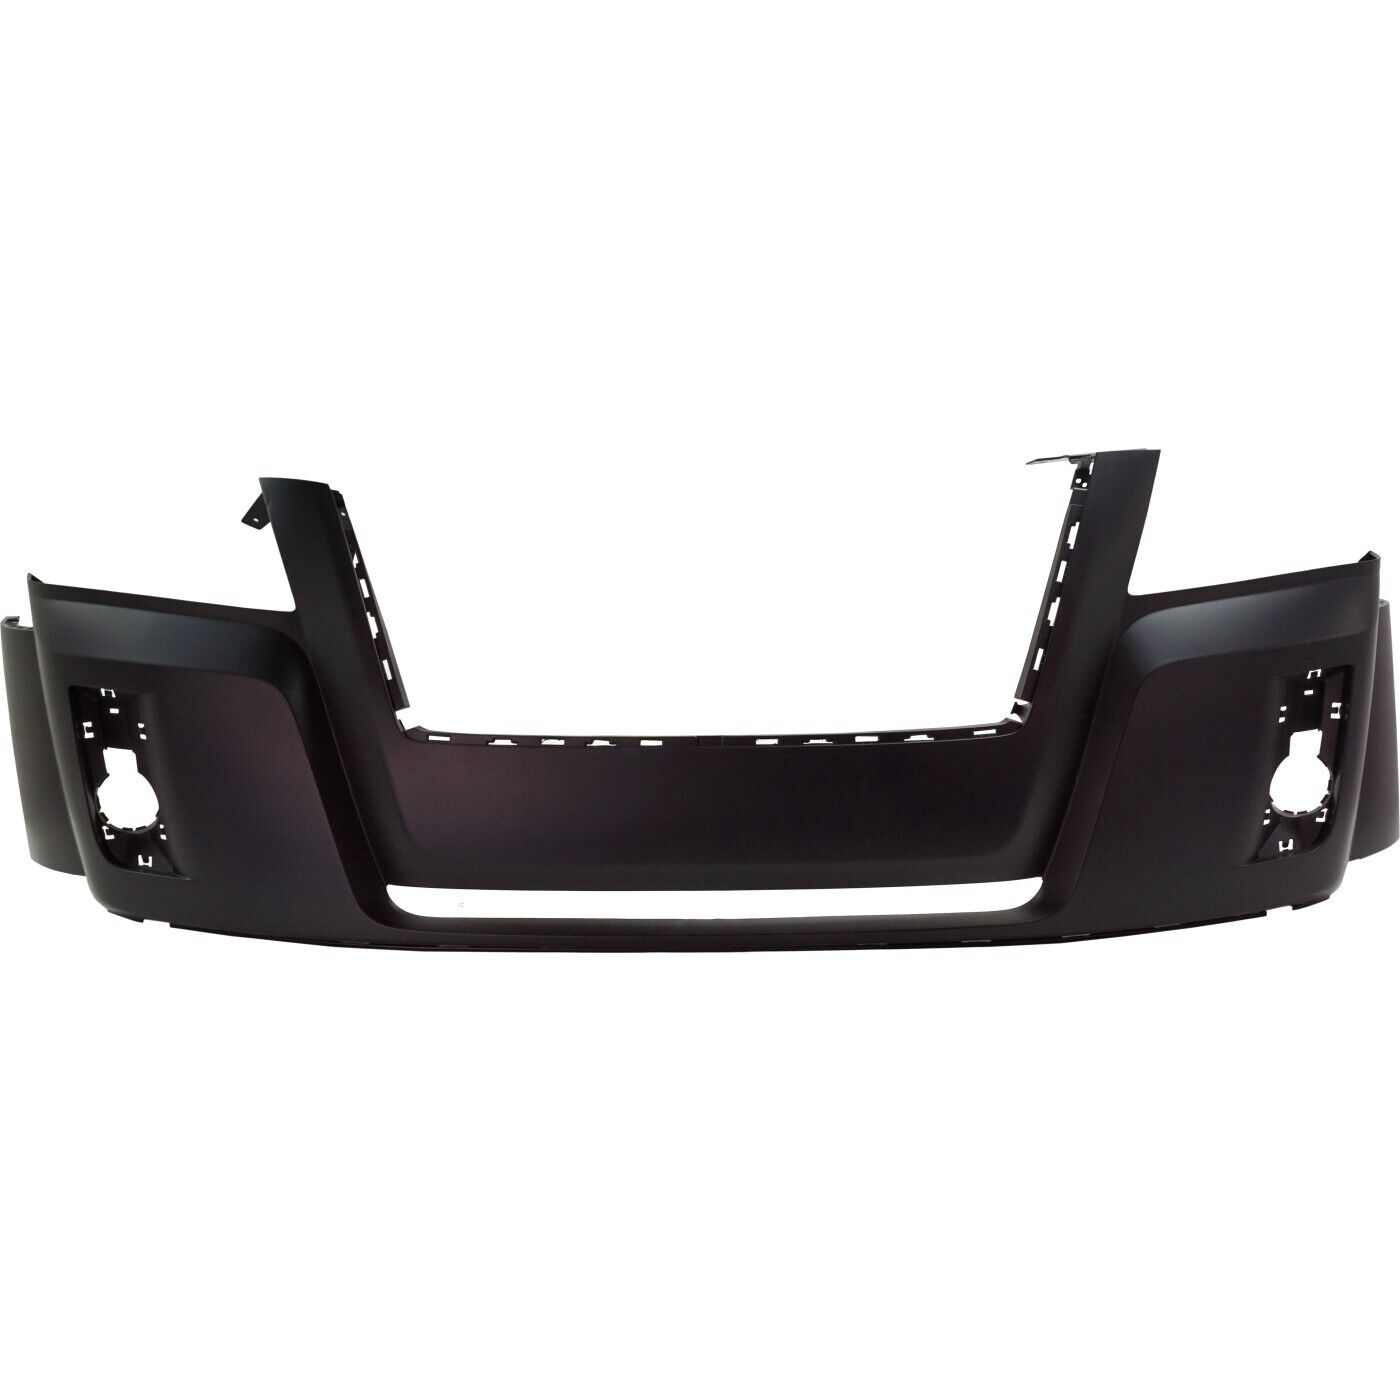 Front Bumper Cover For 2010-2015 GMC Terrain With Fog Lamp Holes Primed